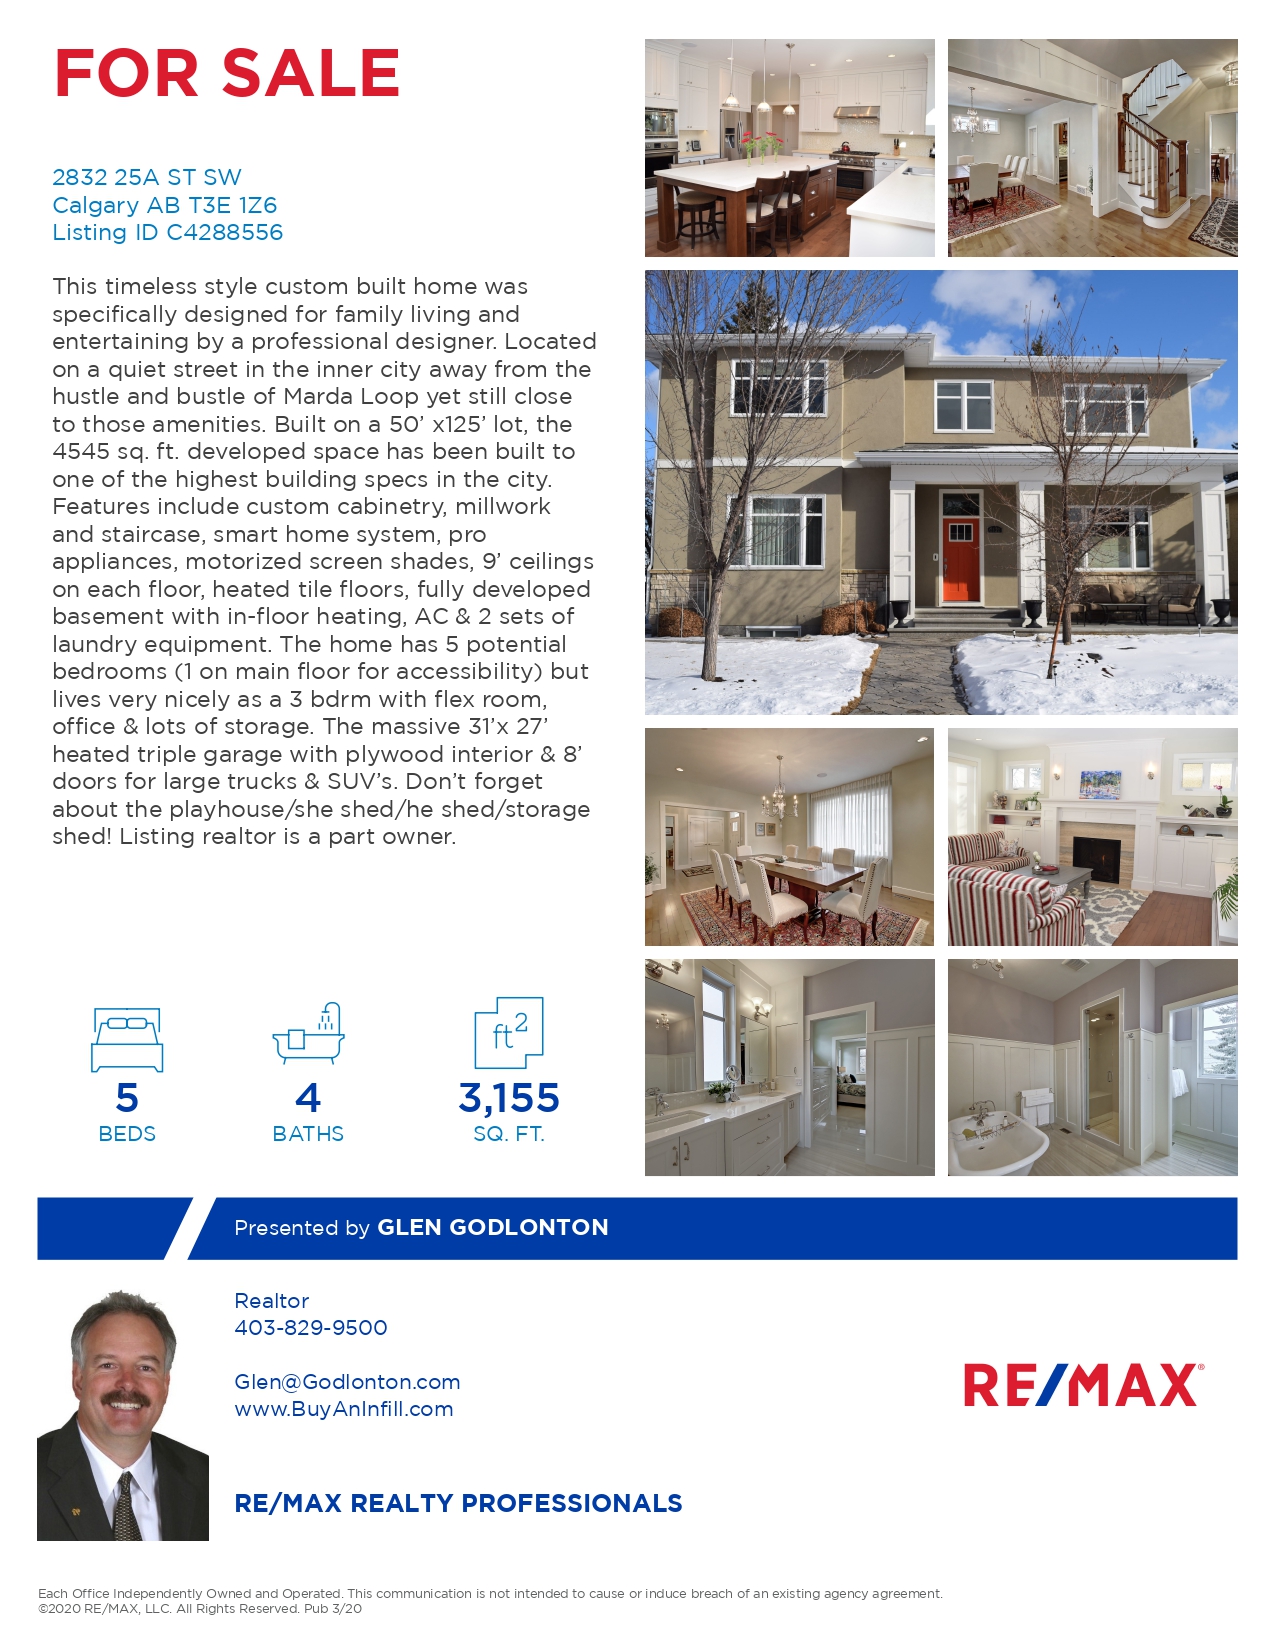 Final Feature Sheet 2832 25A St SW color NO PRICE | Richmond Executive 5 Bedroom Home